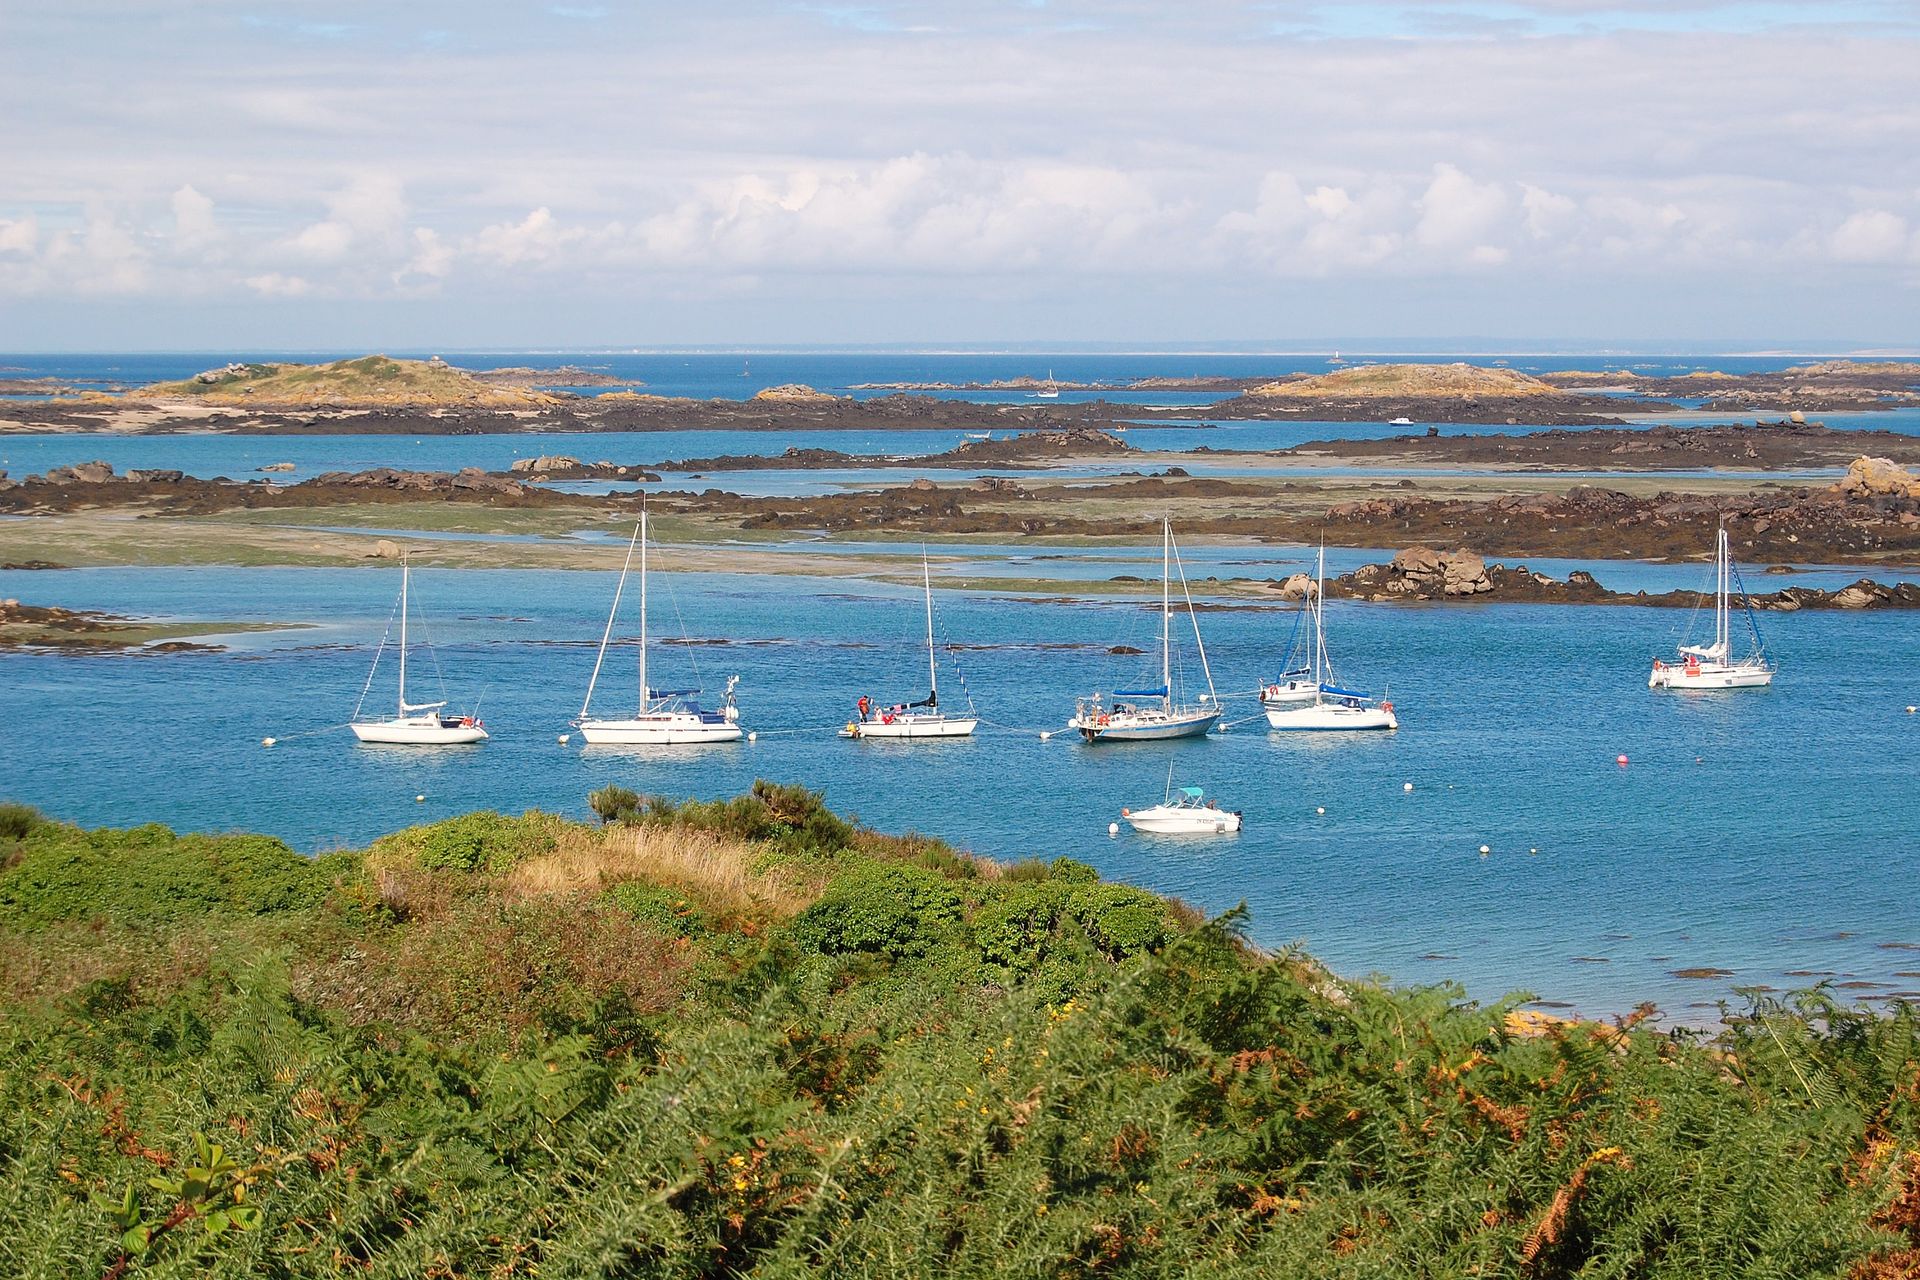 Îles Chausey, Normandie - France ©Wikipedia